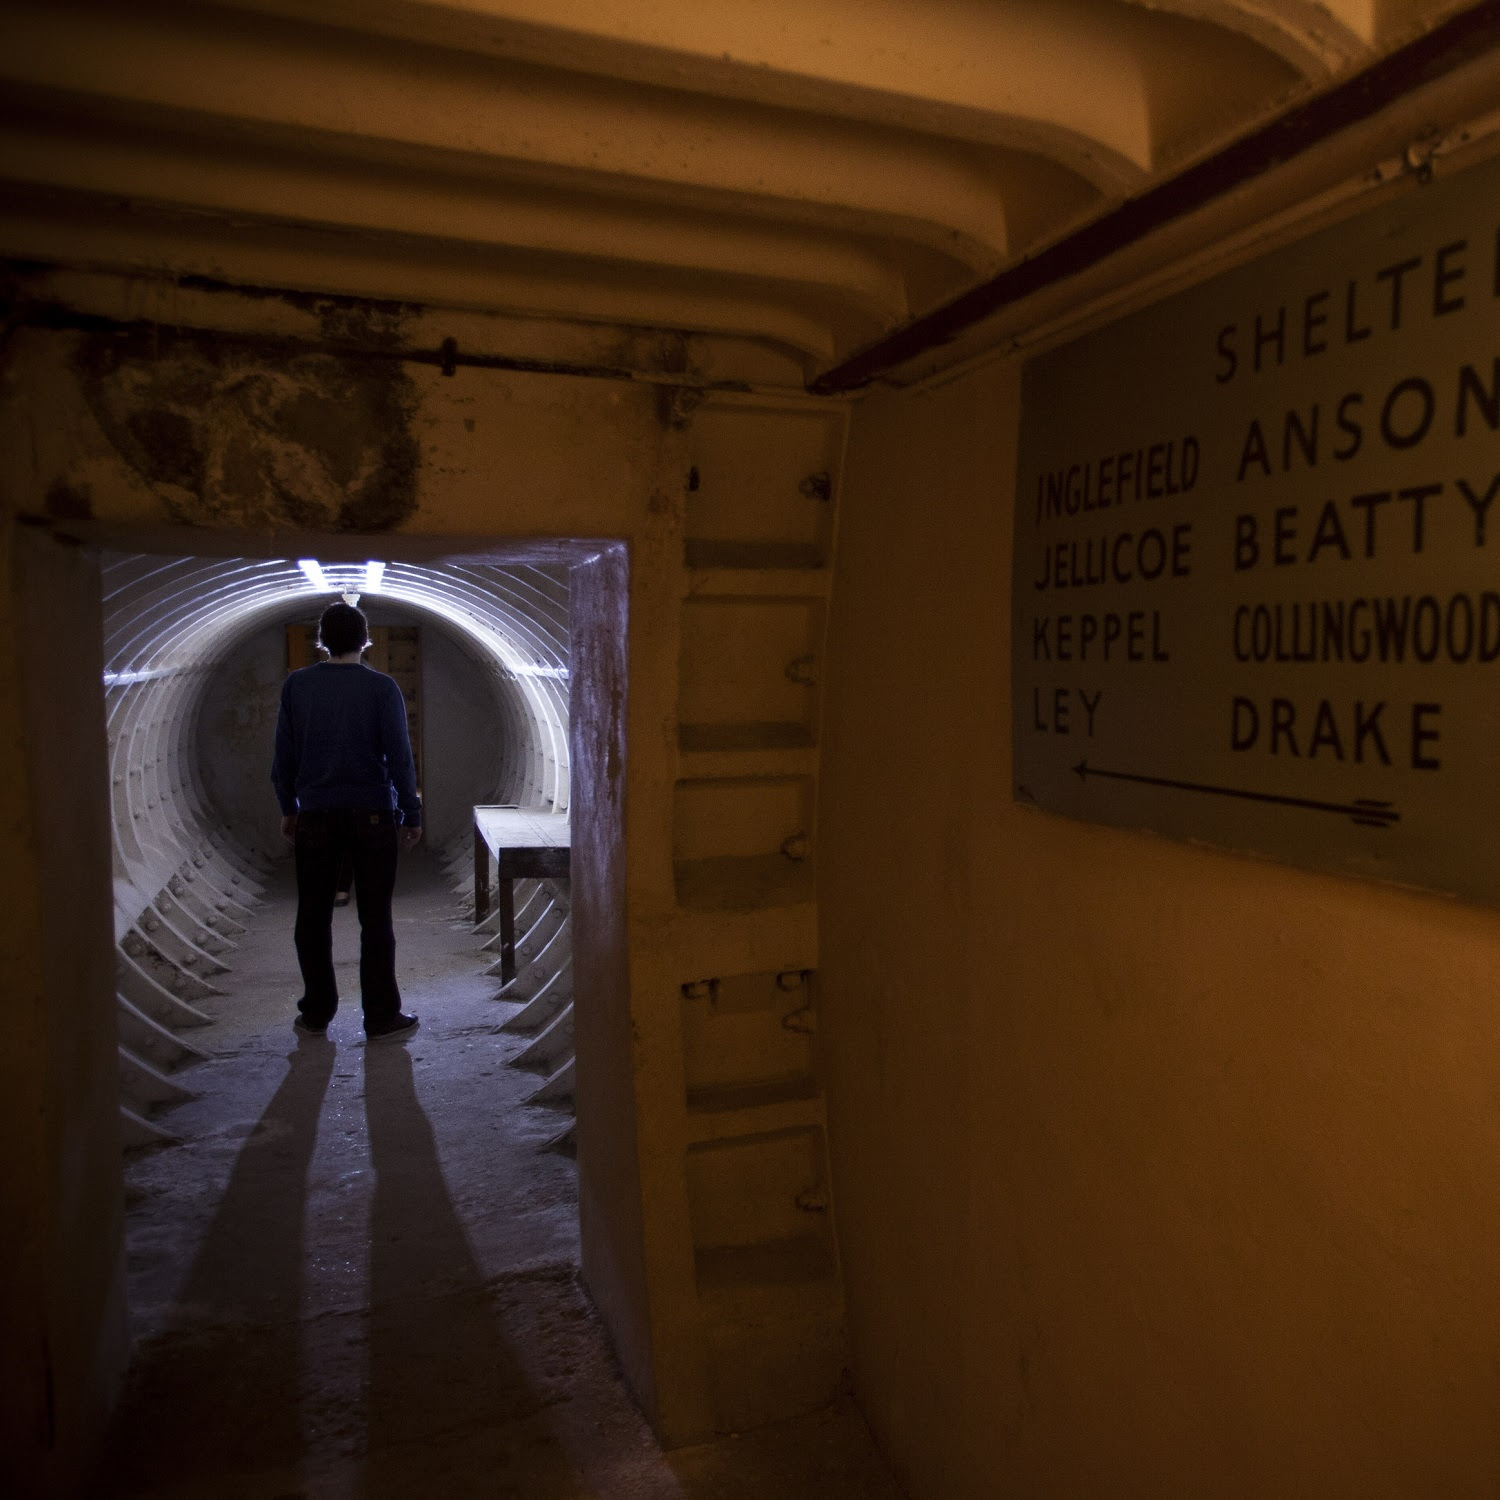 A person walks through a circular tunnel with a sign on the right hand side